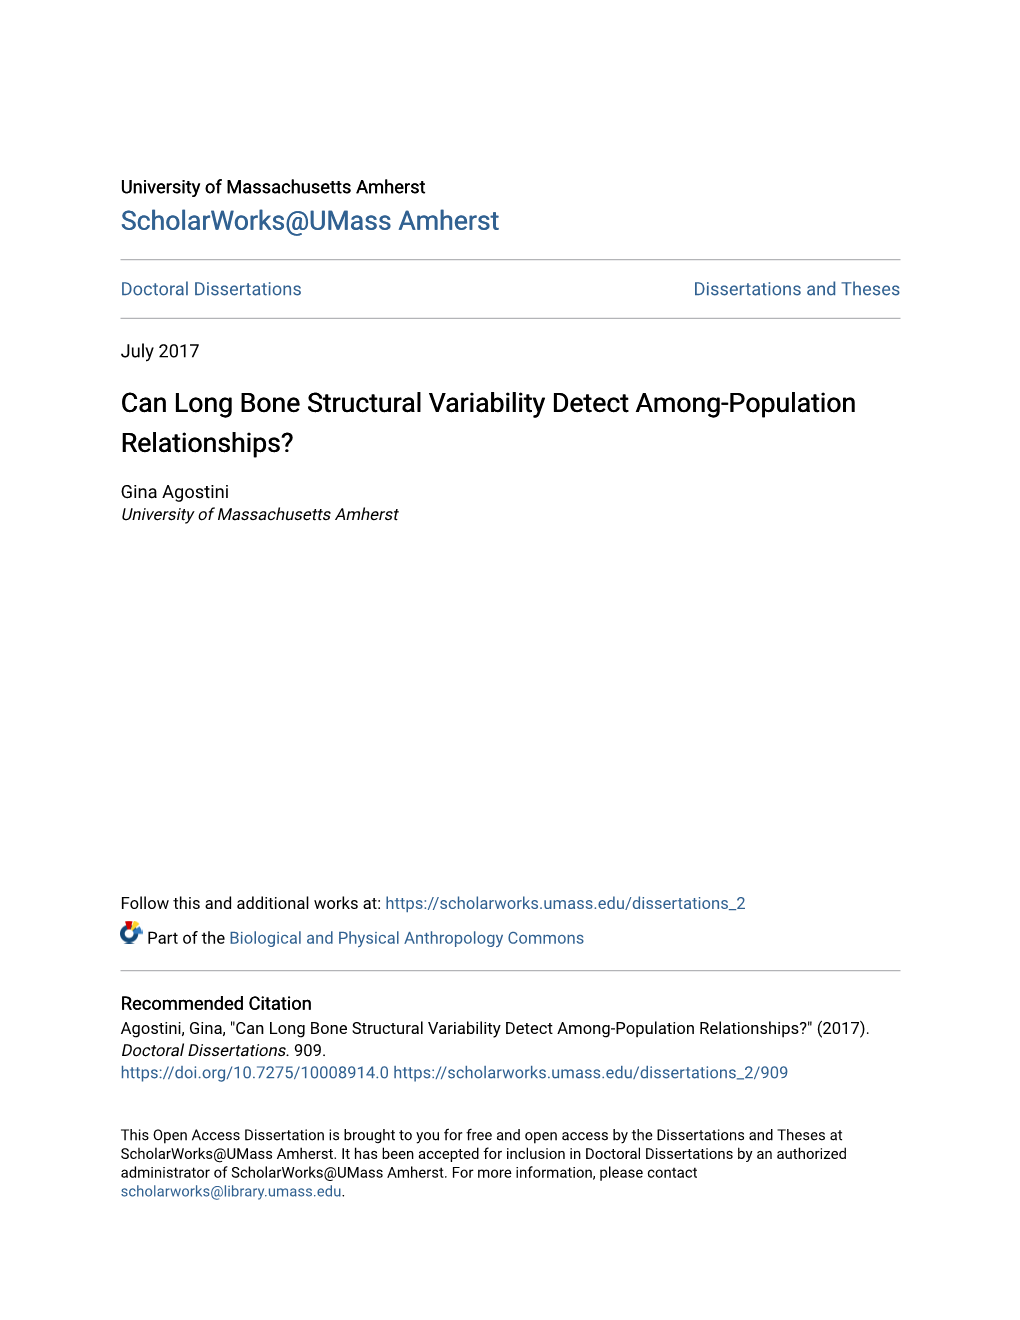 Can Long Bone Structural Variability Detect Among-Population Relationships?